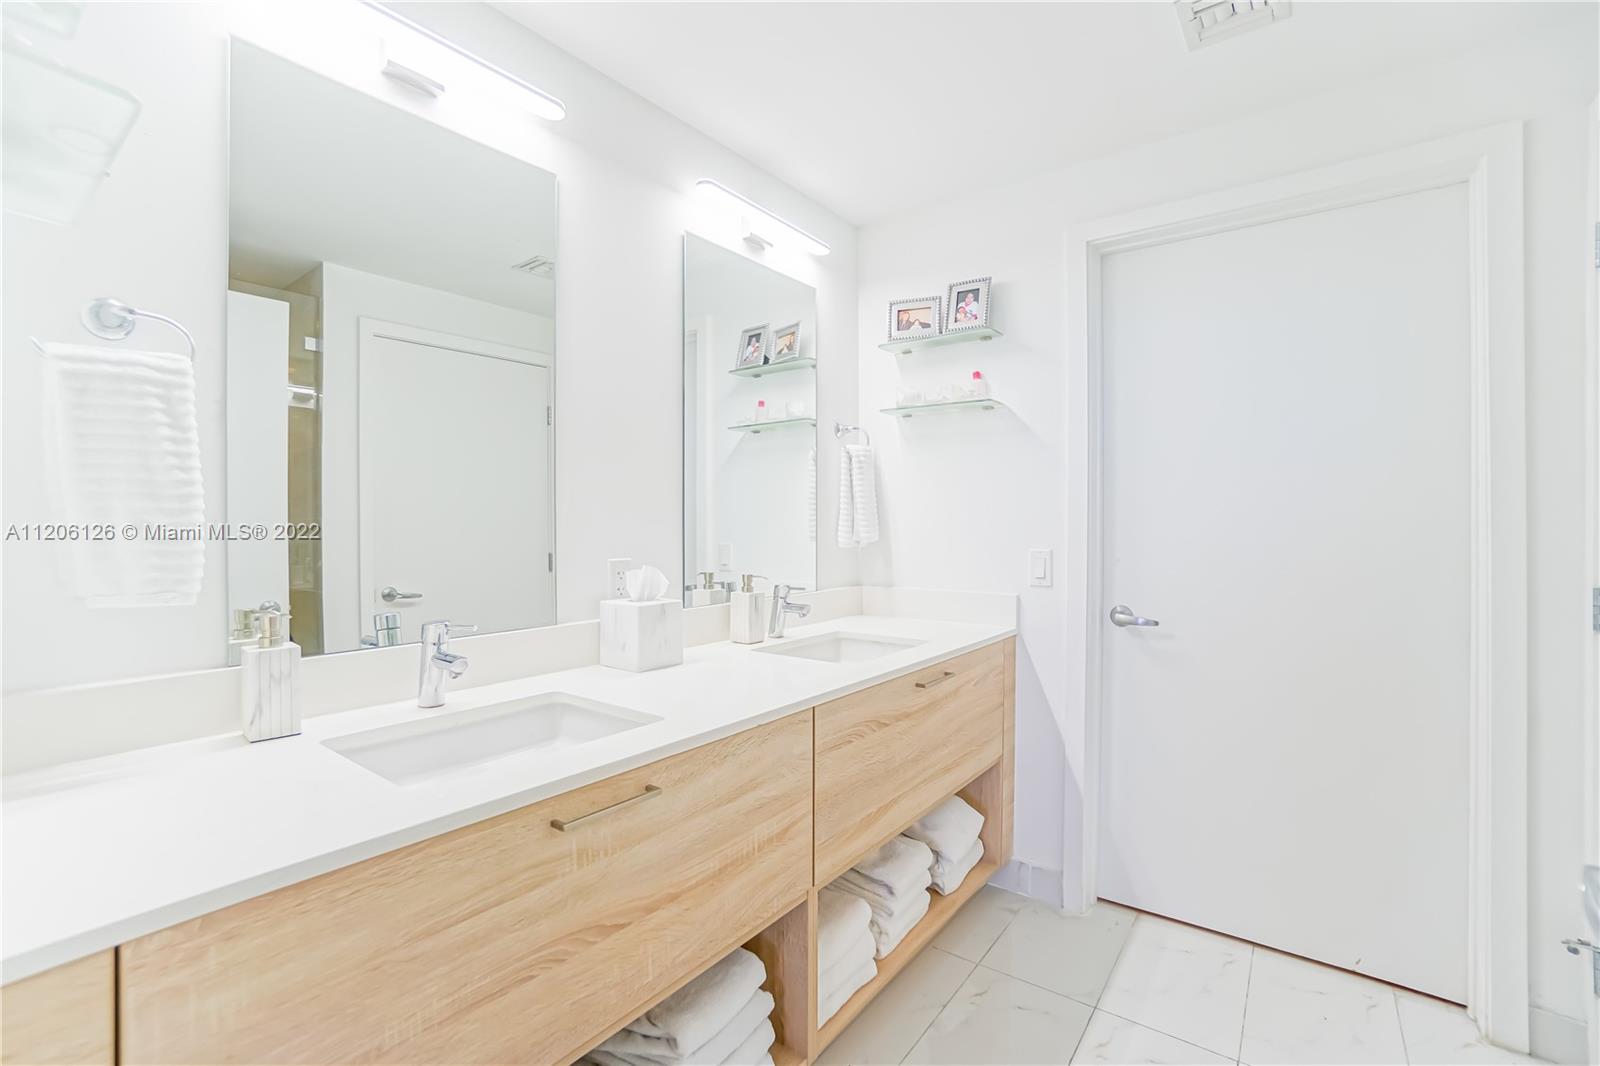 Master Bathroom , double sink, private toilet, nice shower and amazing Walk in Customized Closets!